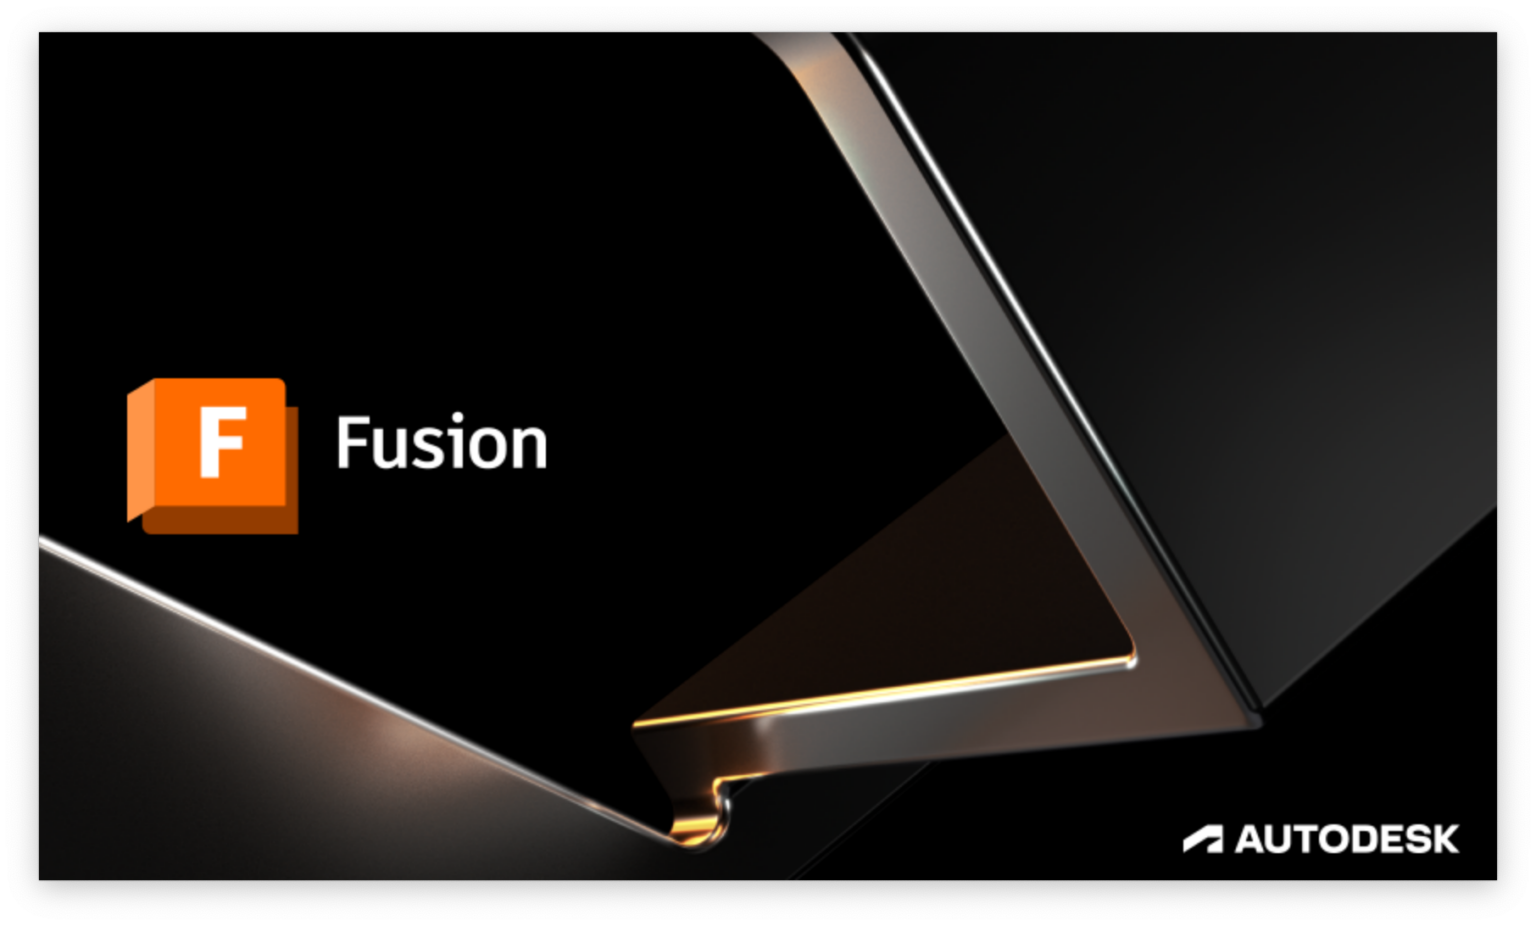 Autodesk Fusion formerally called Autodesk Fusion 360